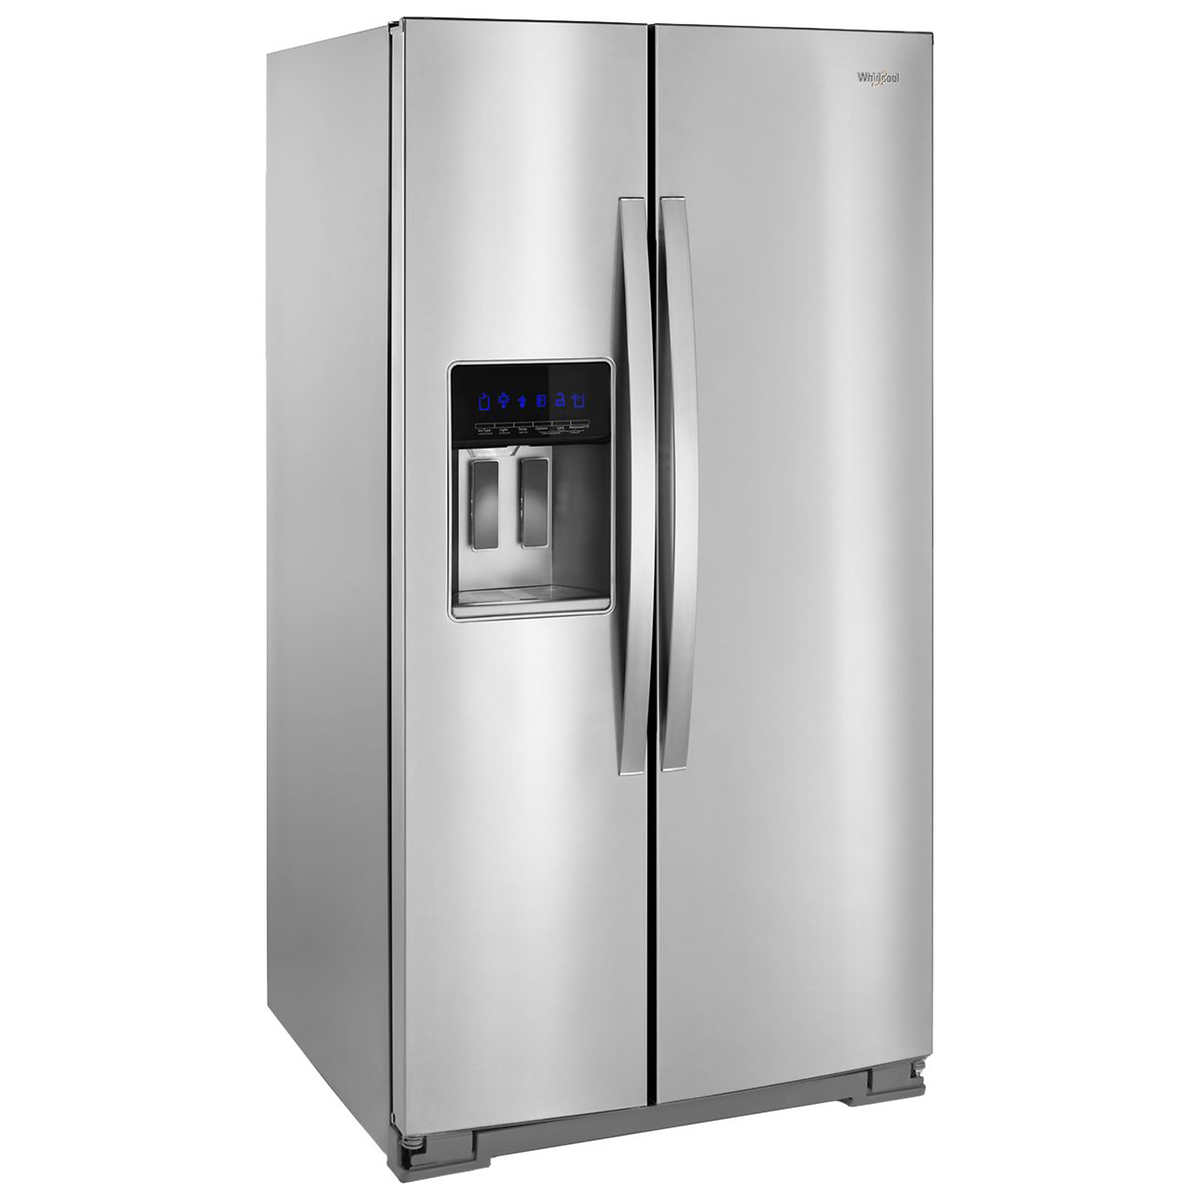 Whirlpool 28 cu. ft. Side-by-Side Refrigerator with Exterior Ice and Water Dispenser $1180. Reg $1930. F/S for Costco members.